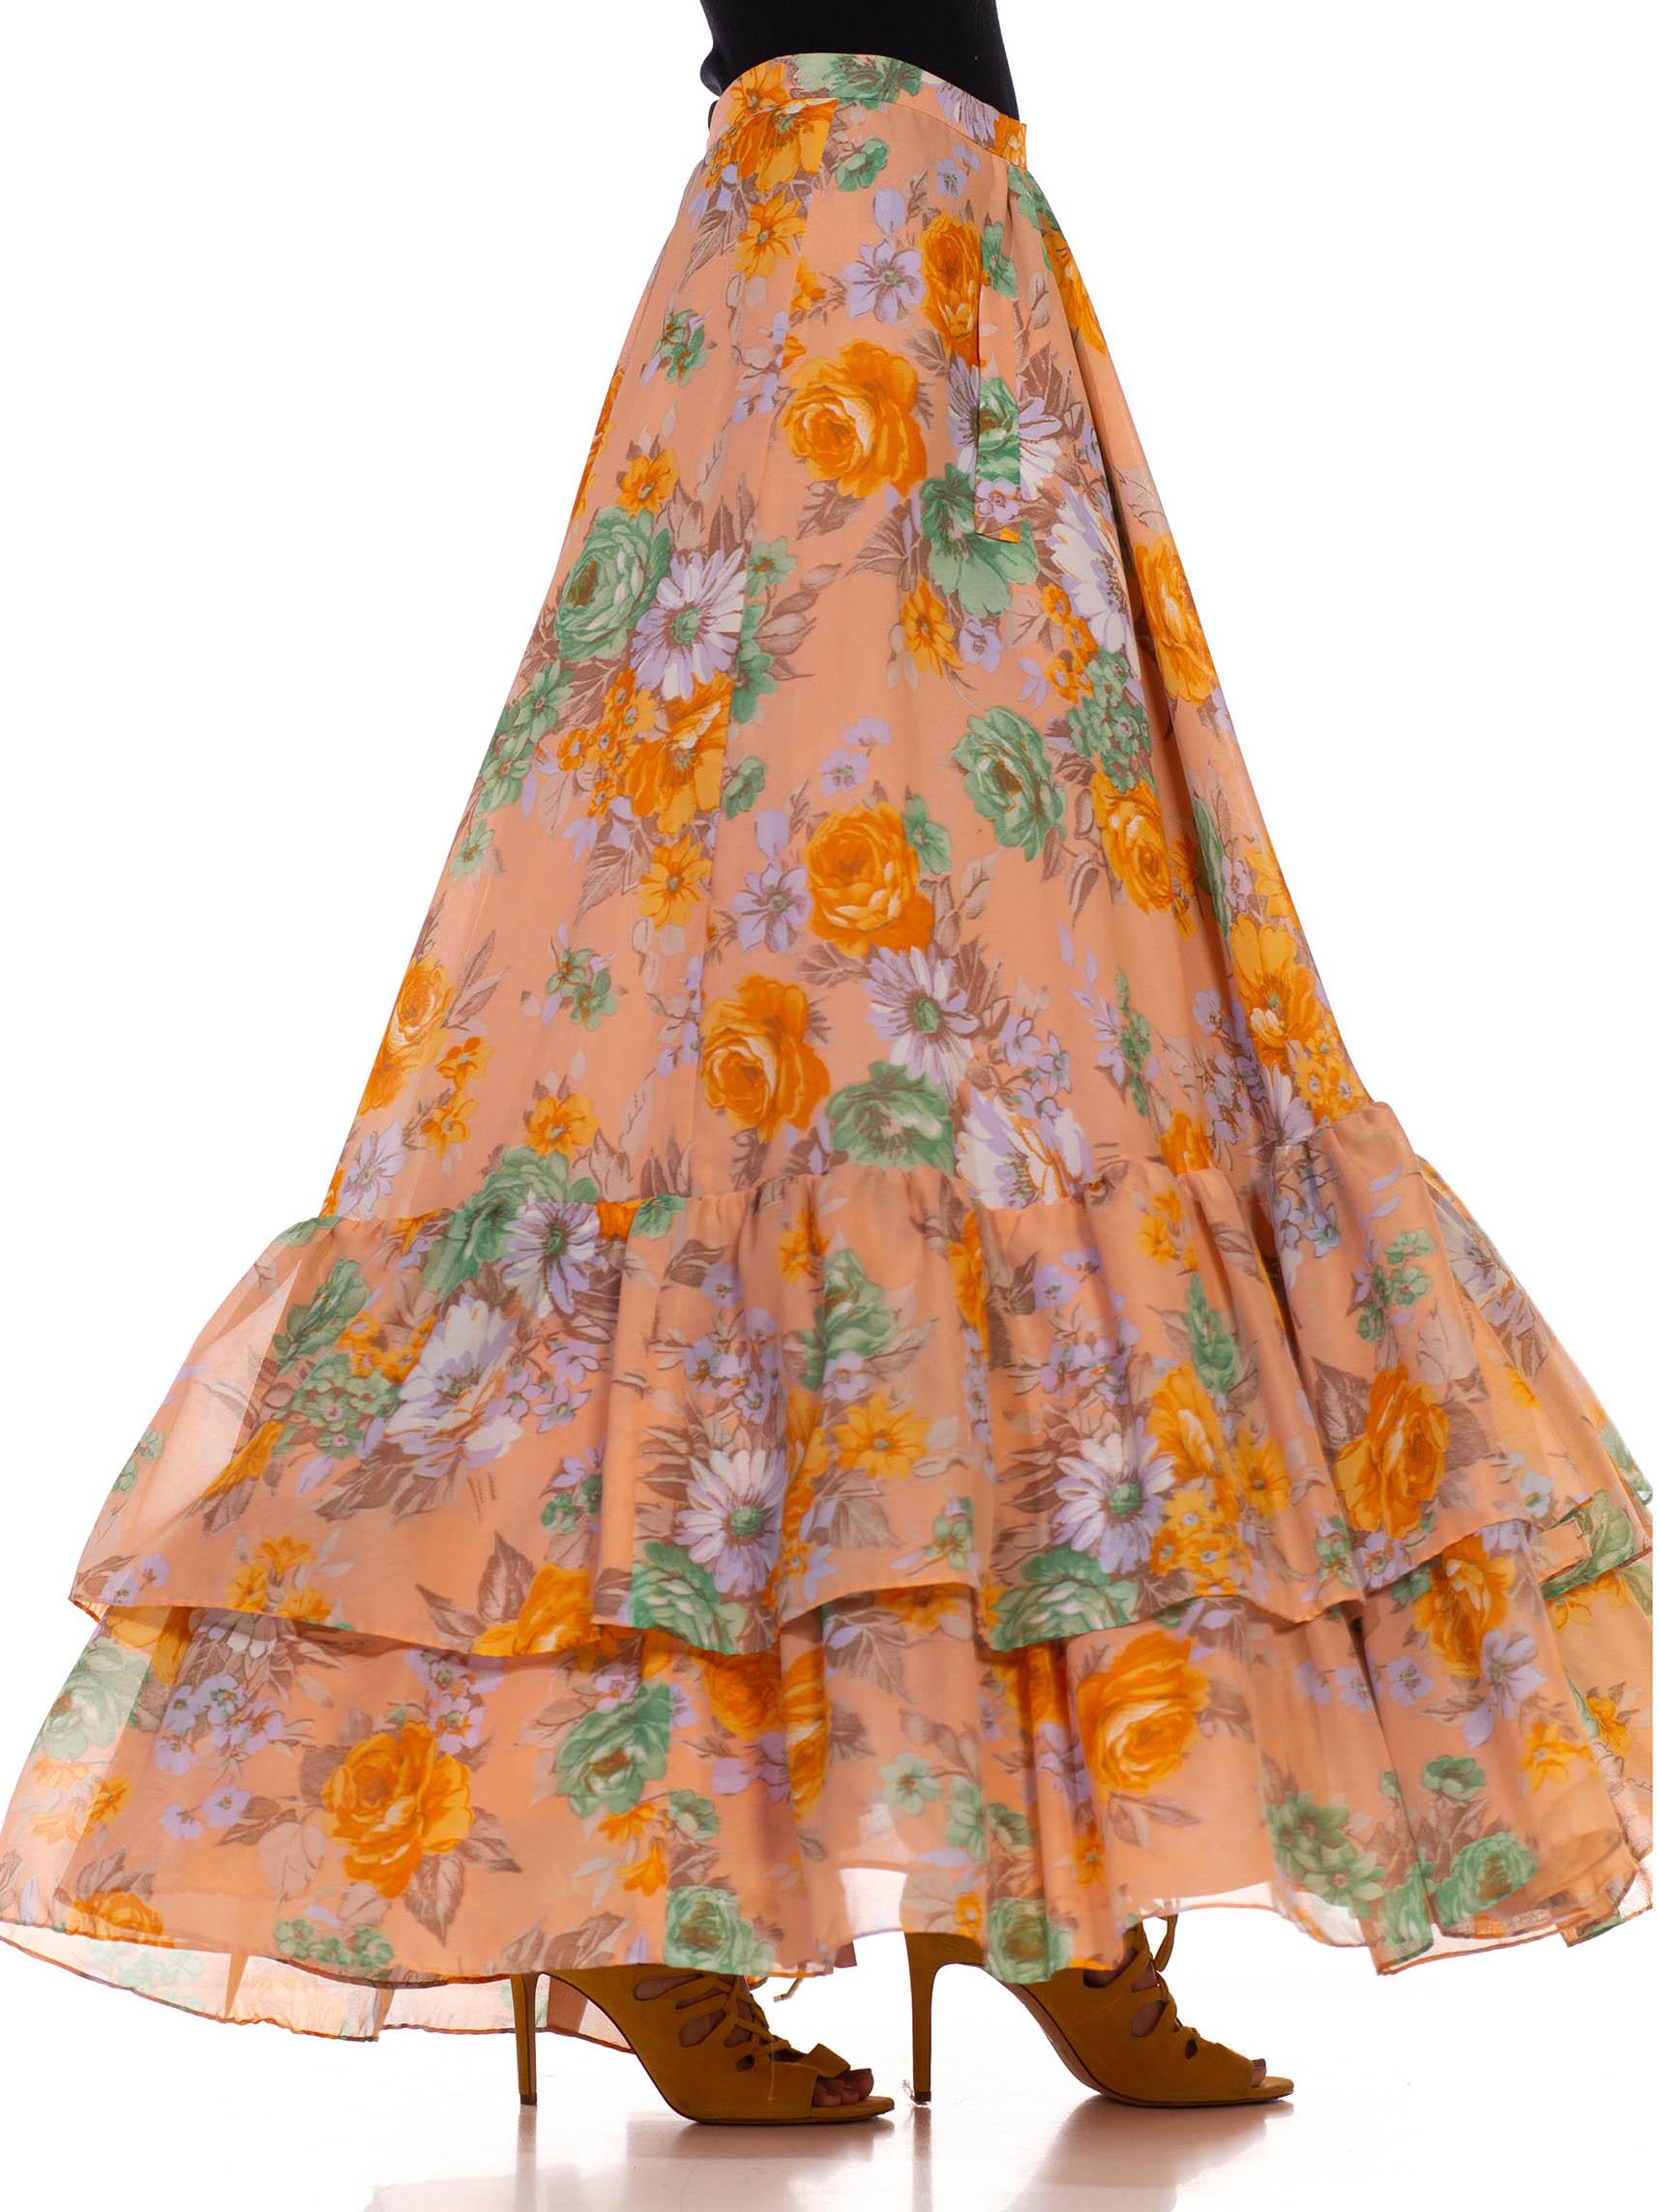 Women's 1970S Dusty Pink Orange & Green Floral Tiered Ruffle Skirt For Sale